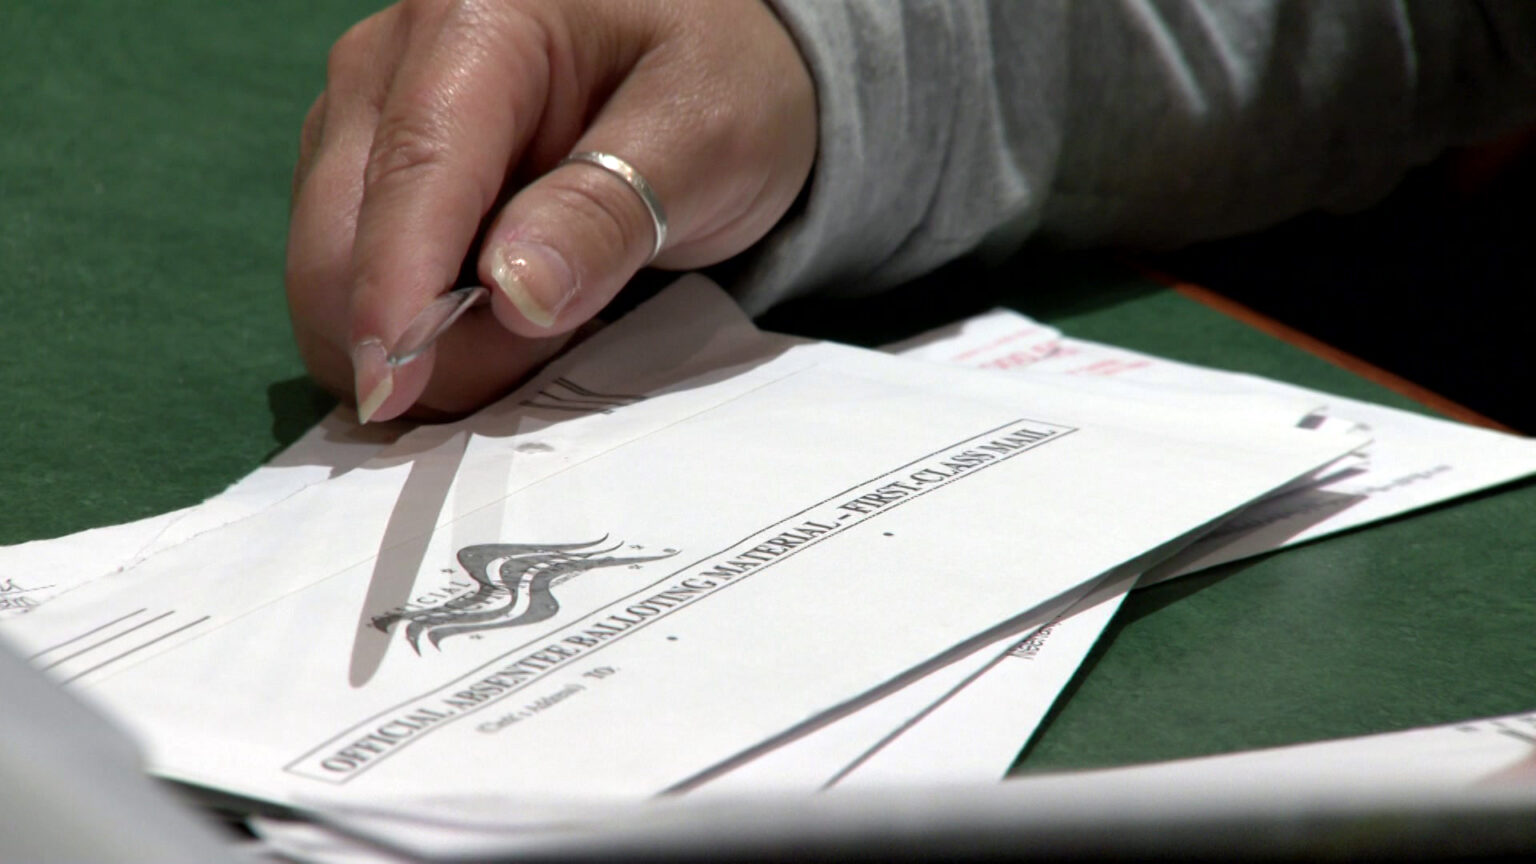 An elections worker uses a letter opener to unseal a stack of absentee ballot envelopes on top of a table.